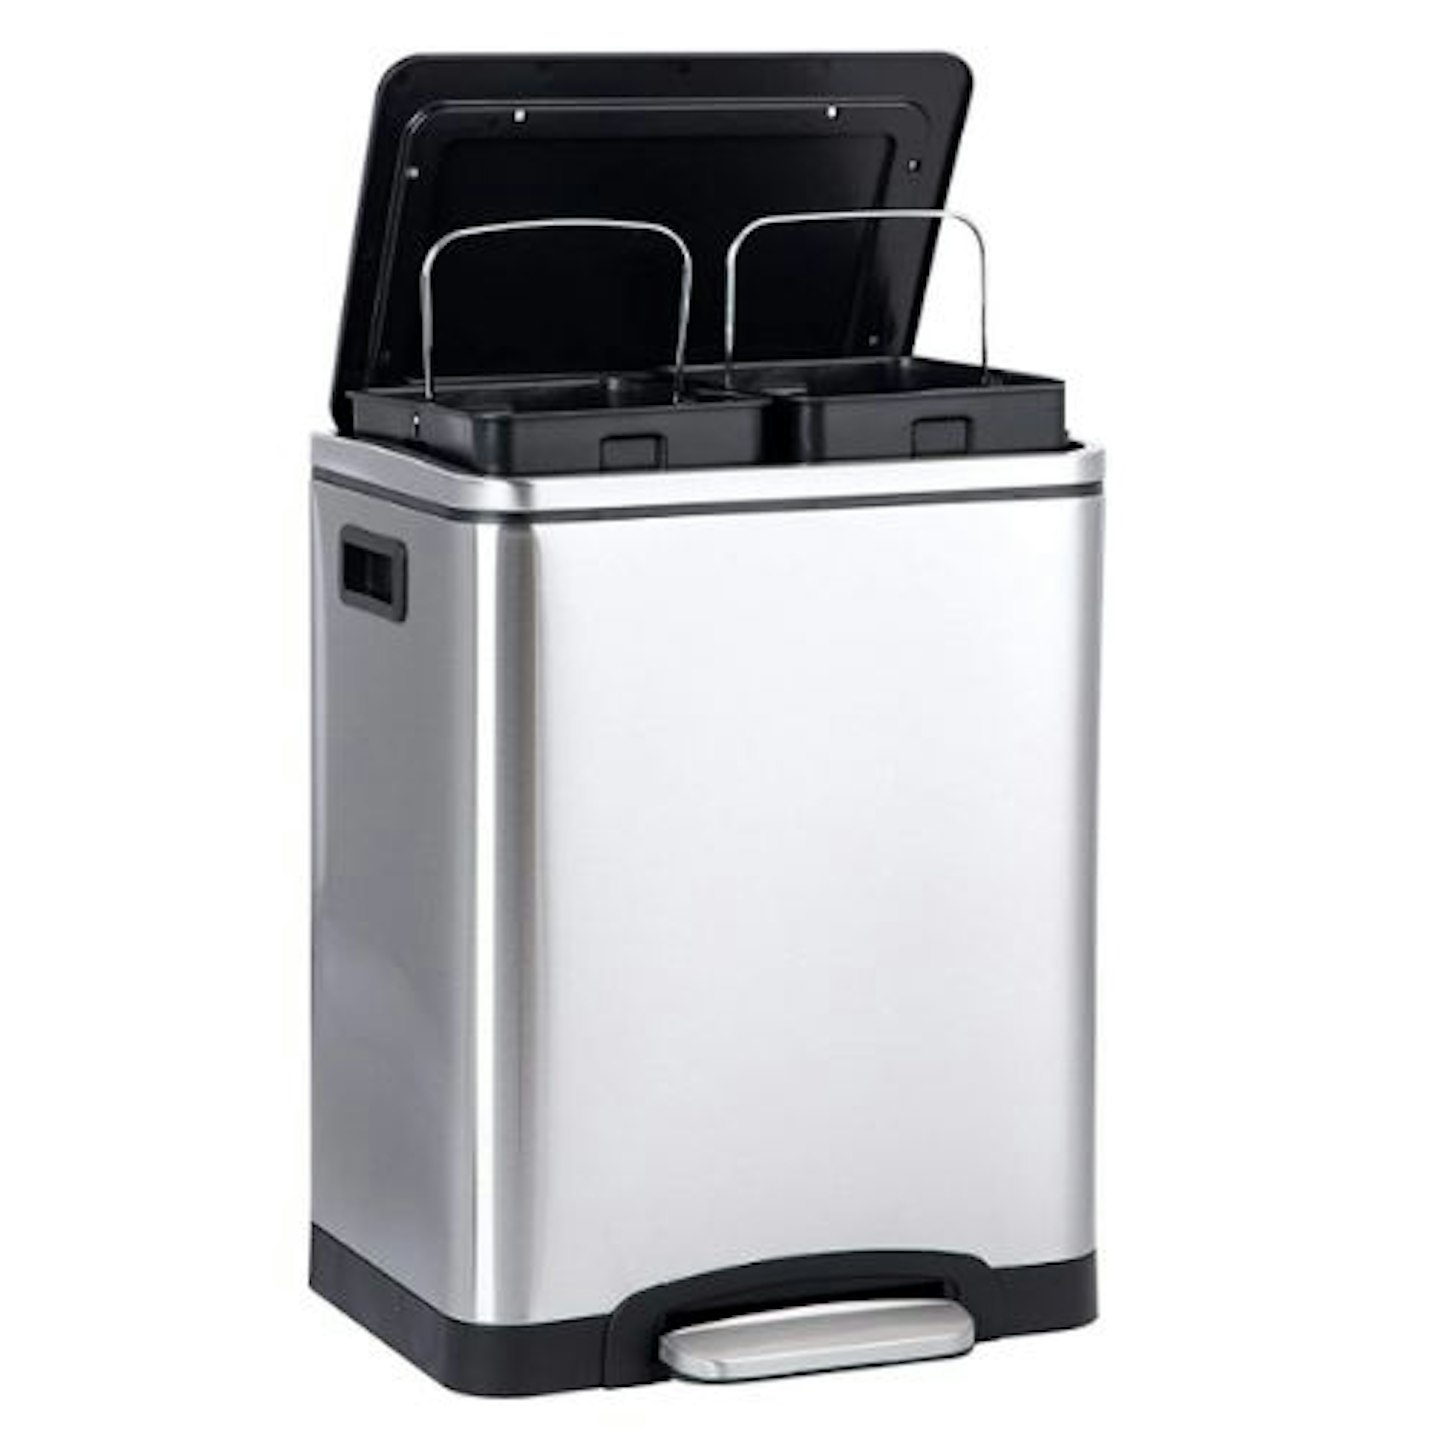 Amazon Basics 2x15L Dual Compartment Dustbin with Steel Bar Pedal